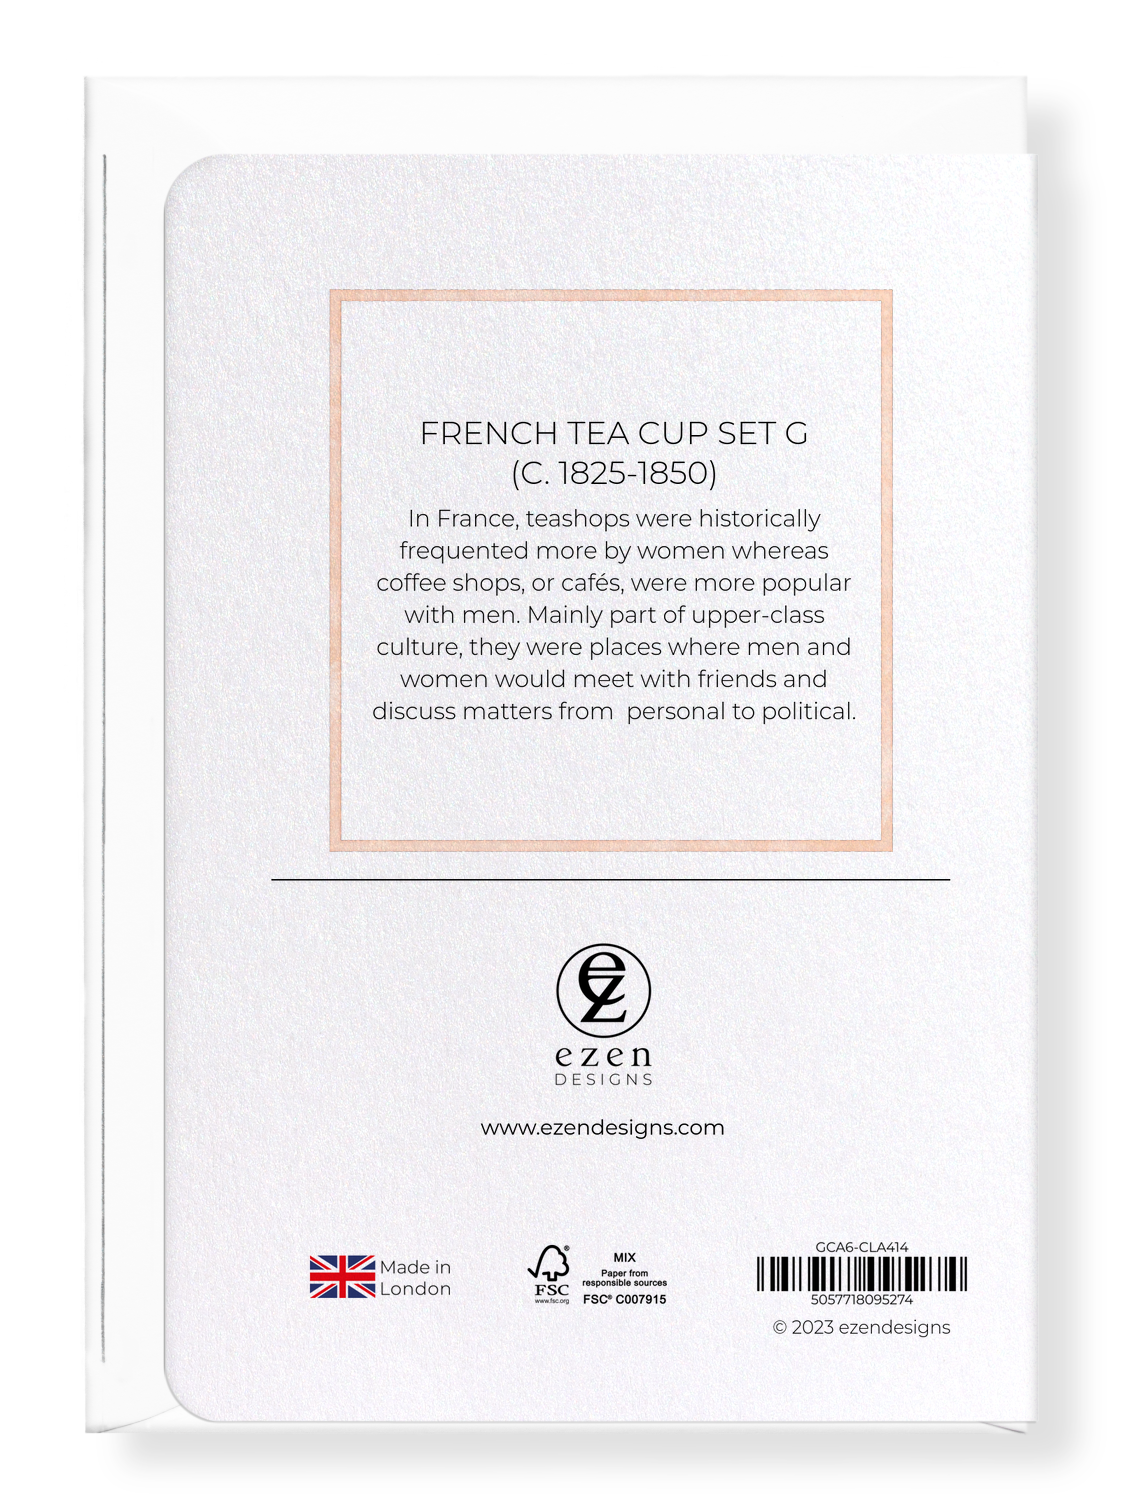 Ezen Designs - French Tea Cup Set G (c. 1825-1850) - Greeting Card - Back